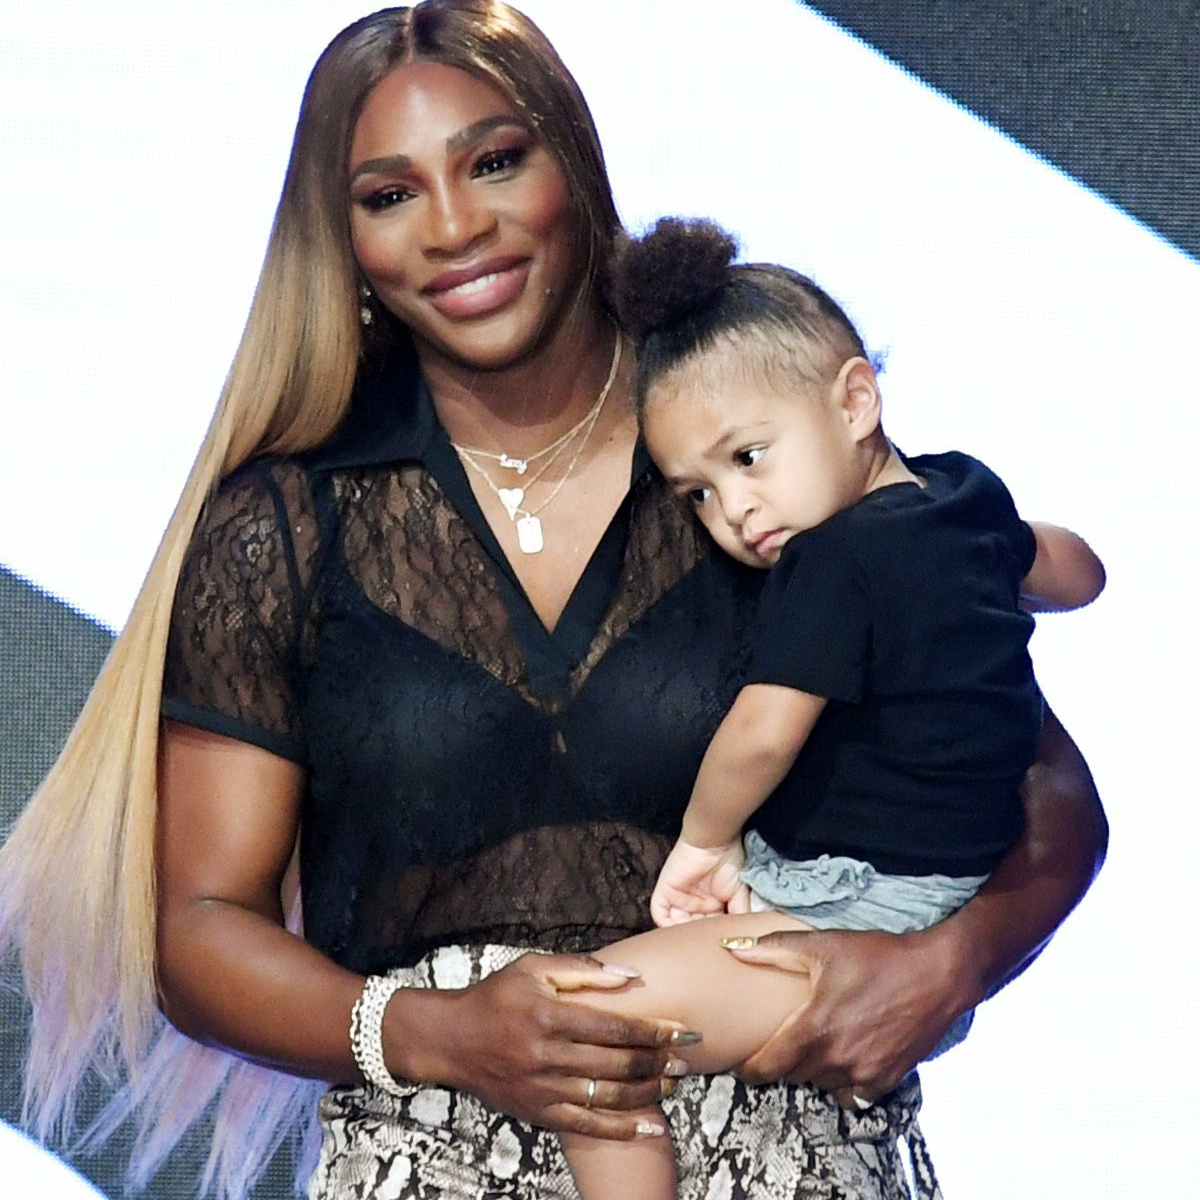 Serena's daughter, Olympia, sports beads, like Mom years ago - The